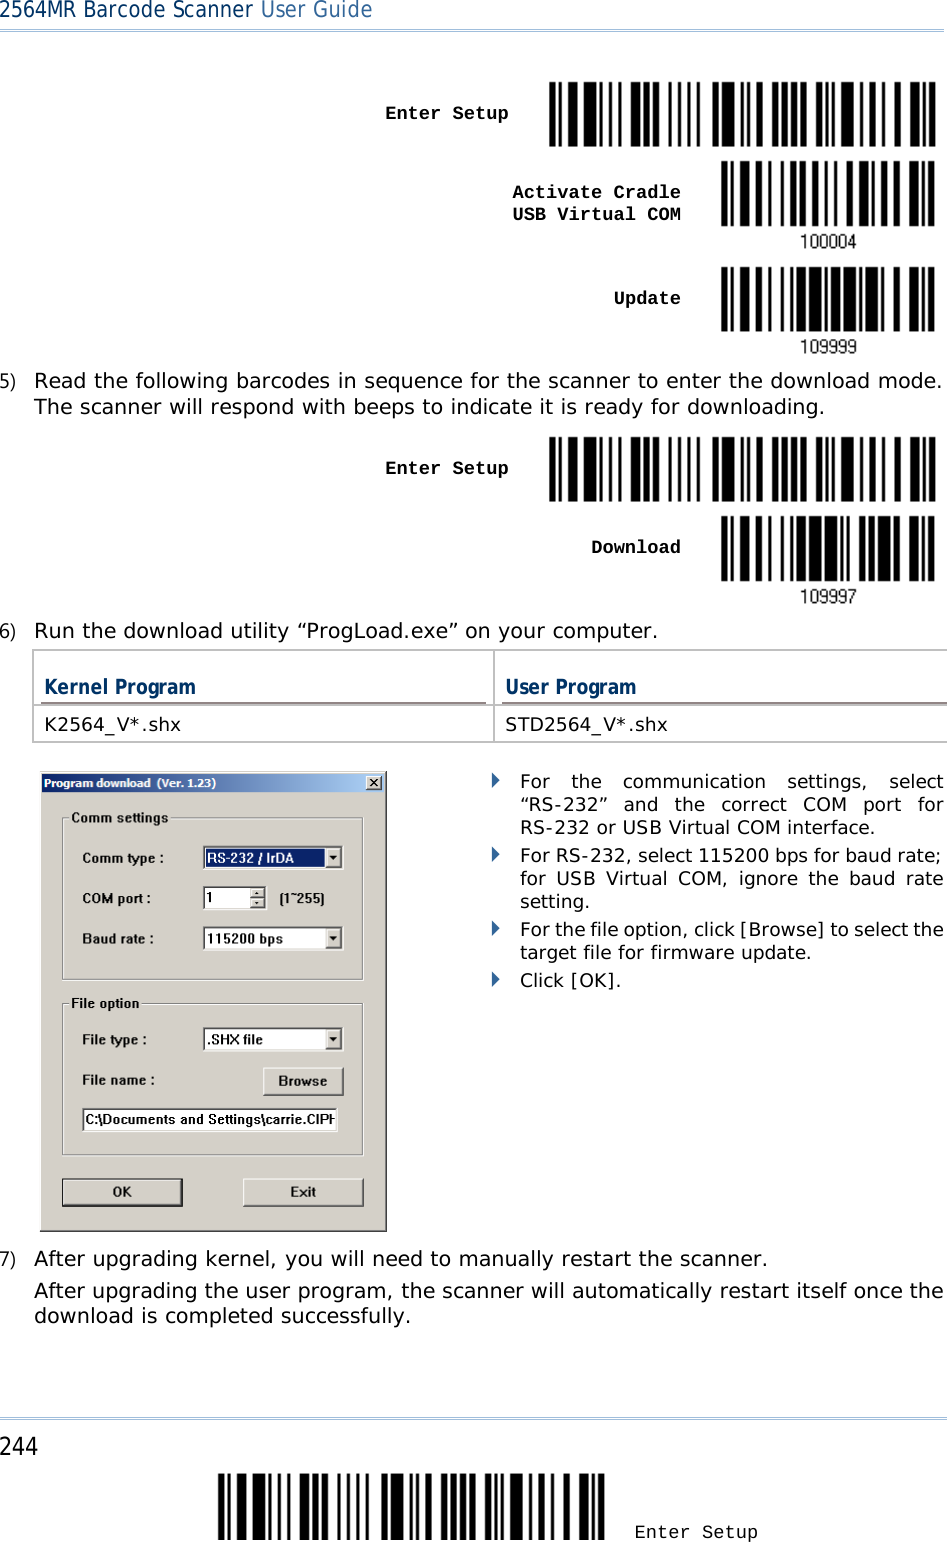 2564MR Barcode Scanner User Guide    Enter Setup     Activate Cradle     USB Virtual COM     Update  5) Read the following barcodes in sequence for the scanner to enter the download mode. The scanner will respond with beeps to indicate it is ready for downloading.   Enter Setup     Download  6) Run the download utility “ProgLoad.exe” on your computer.  Kernel Program User Program K2564_V*.shx STD2564_V*.shx         For the communication settings, select “RS-232”  and the correct COM port  for RS-232 or USB Virtual COM interface.  For RS-232, select 115200 bps for baud rate; for USB Virtual COM, ignore the baud rate setting.  For the file option, click [Browse] to select the target file for firmware update.   Click [OK]. 7) After upgrading kernel, you will need to manually restart the scanner.      After upgrading the user program, the scanner will automatically restart itself once the download is completed successfully.  244 Enter Setup 